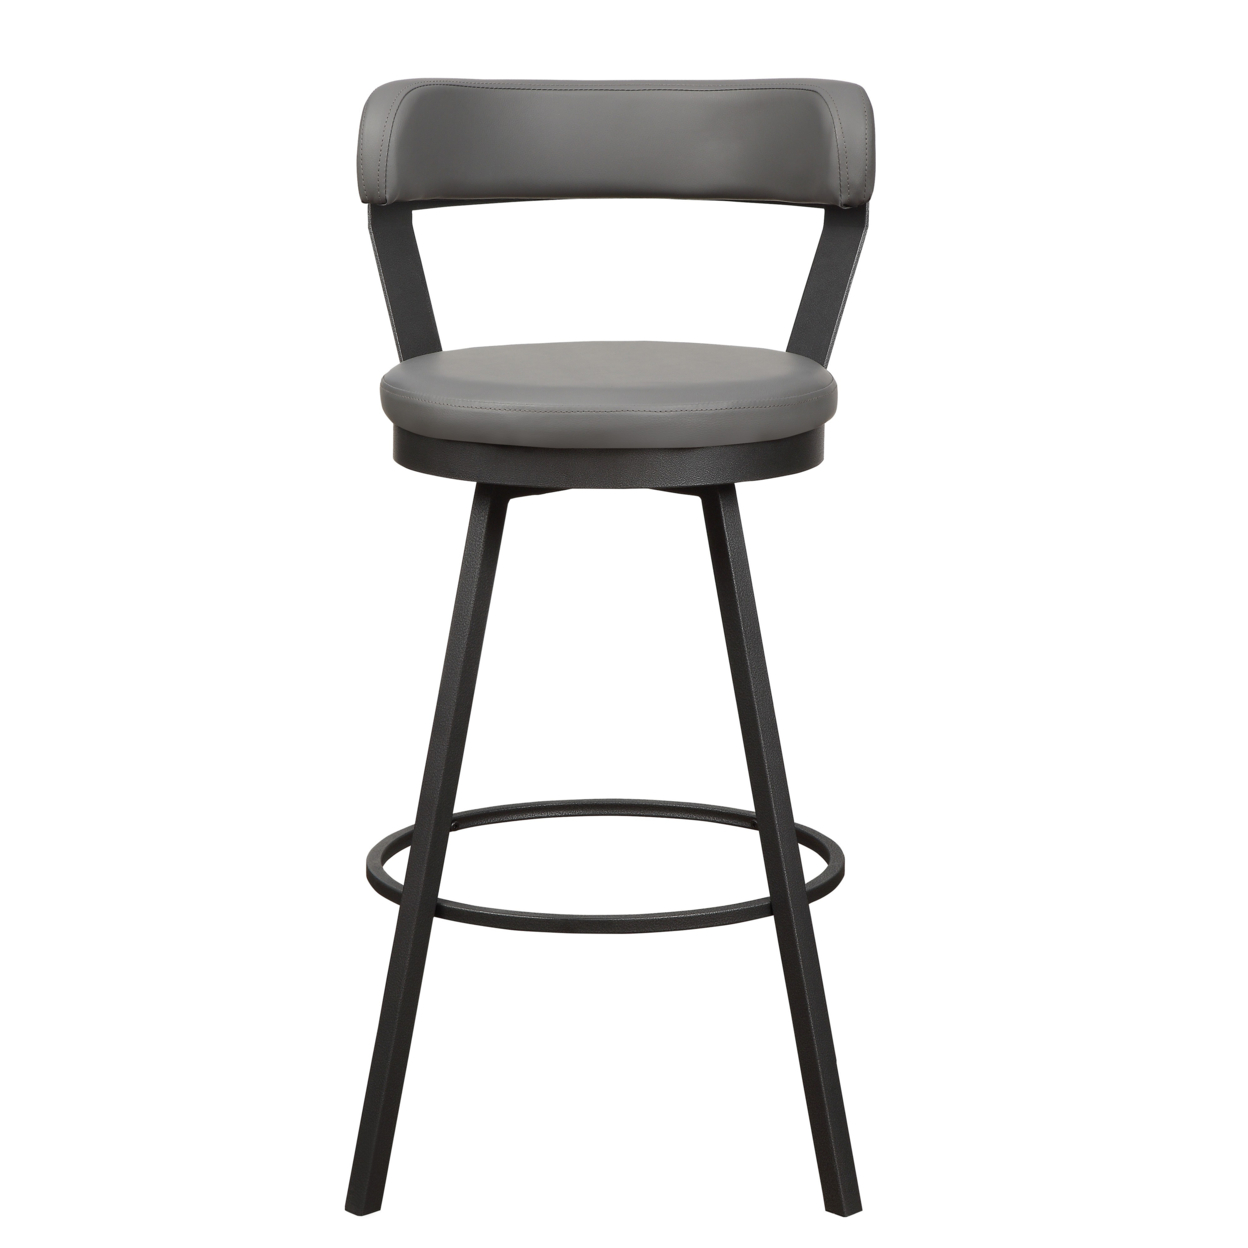 Leatherette Pub Chair With Curved Design Open Backrest, Set Of 2,Light Gray- Saltoro Sherpi